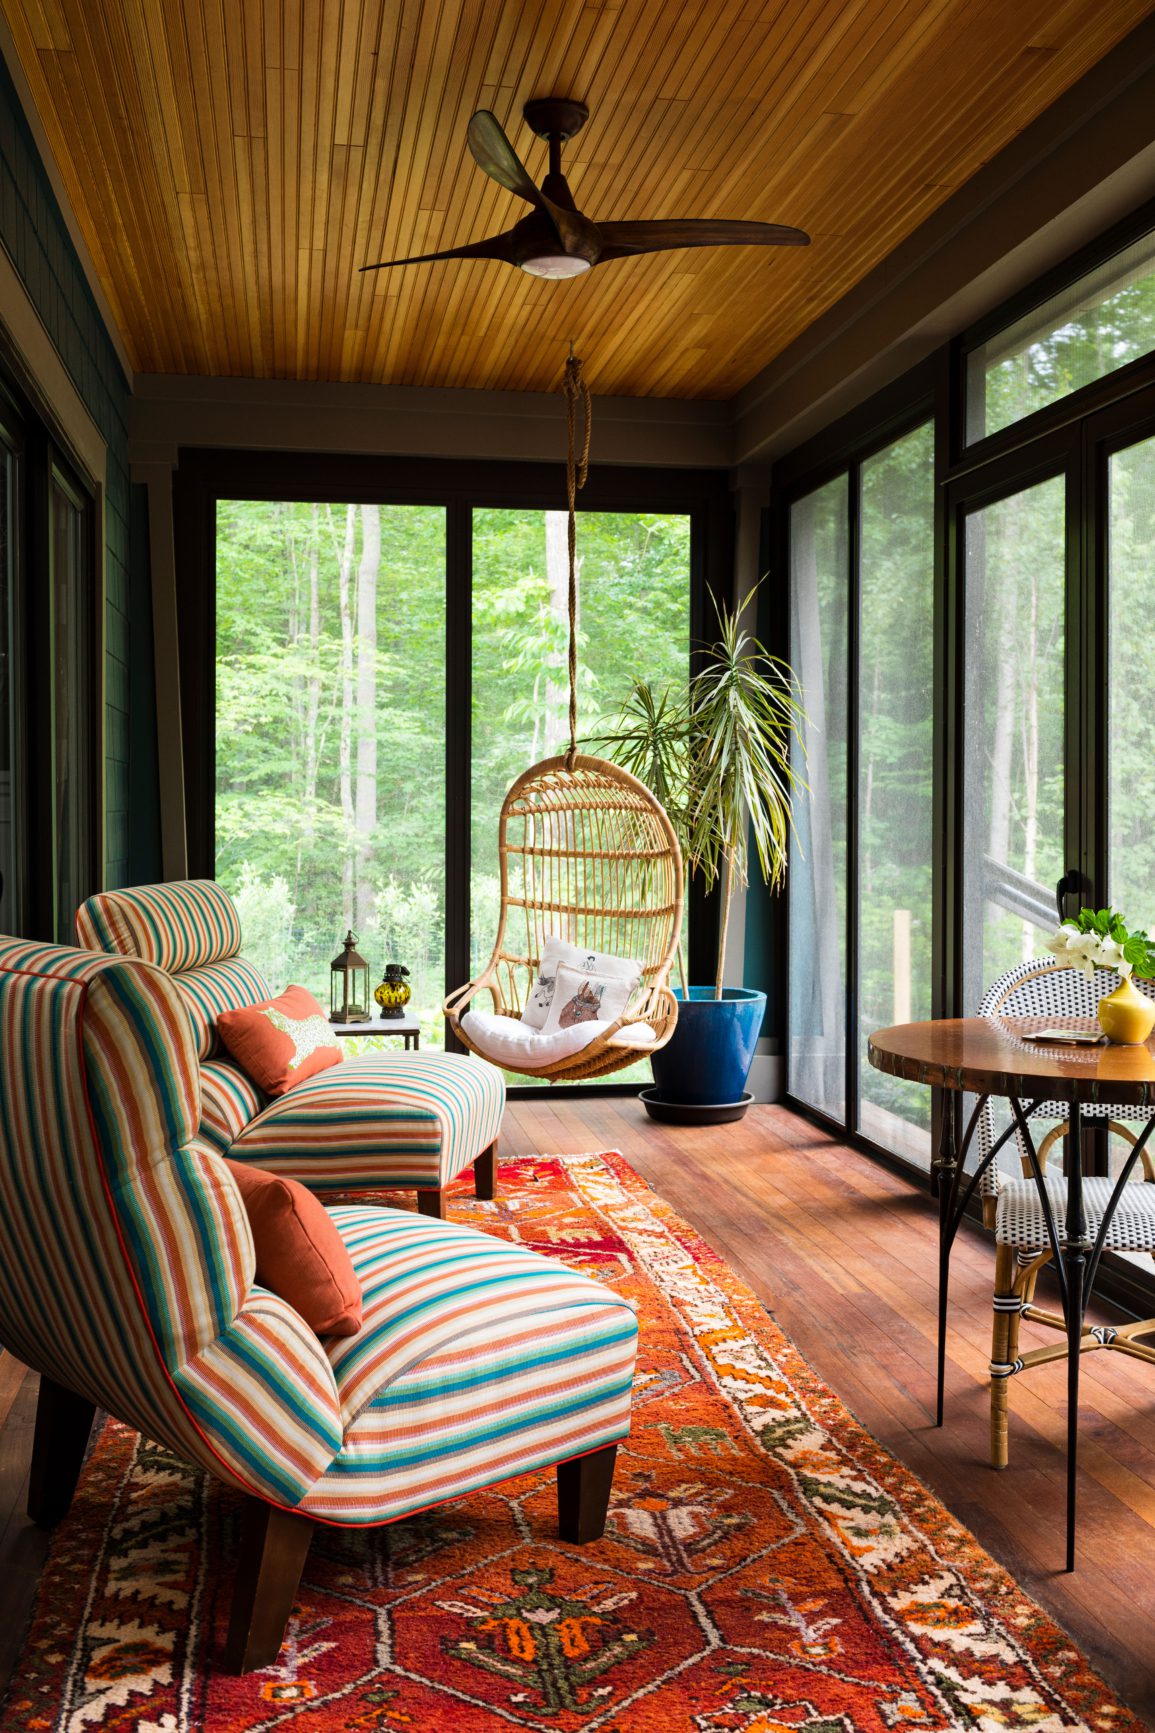 Screened porch and hanging chair